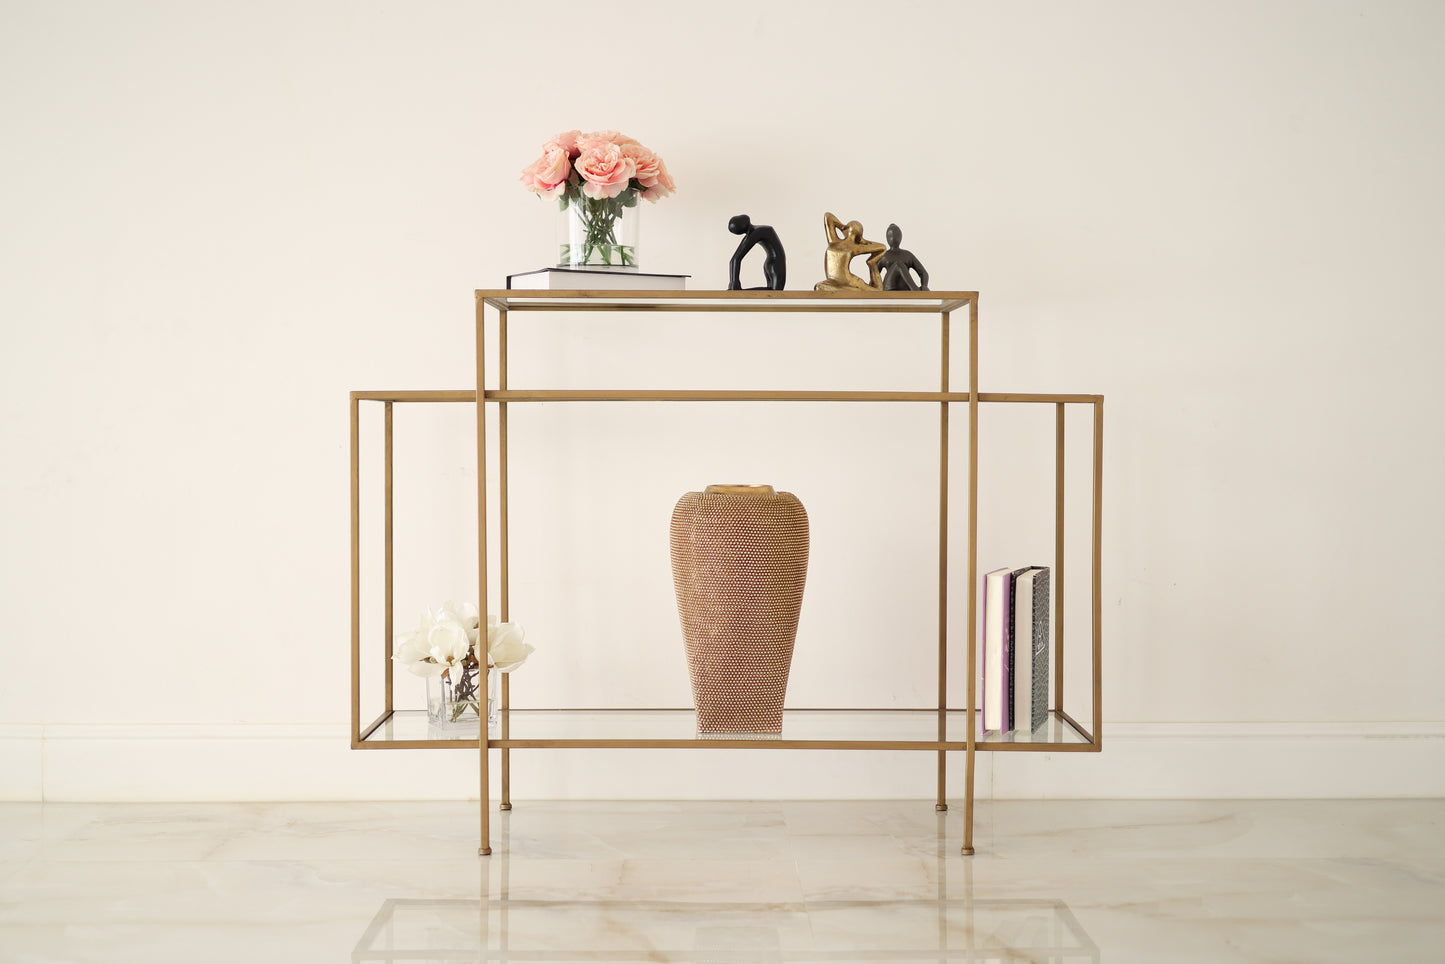 Glass tiered geometric console table